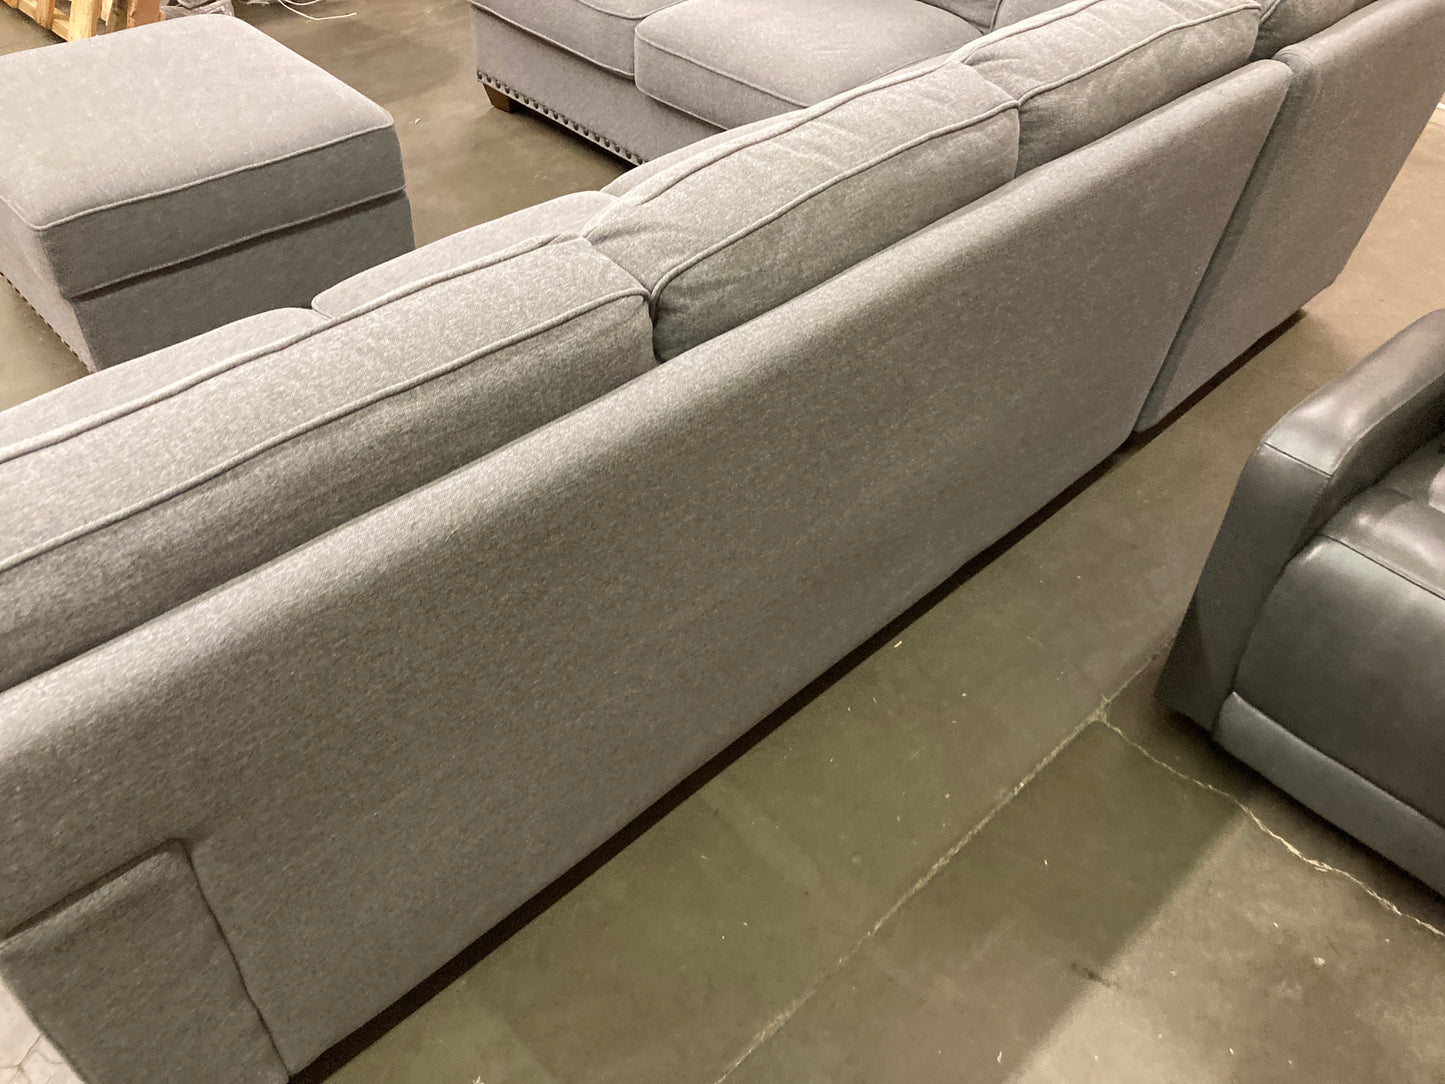 Costco - Thomasville Emilee Fabric Sectional with Storage Ottoman - Retail $1499 Default Title